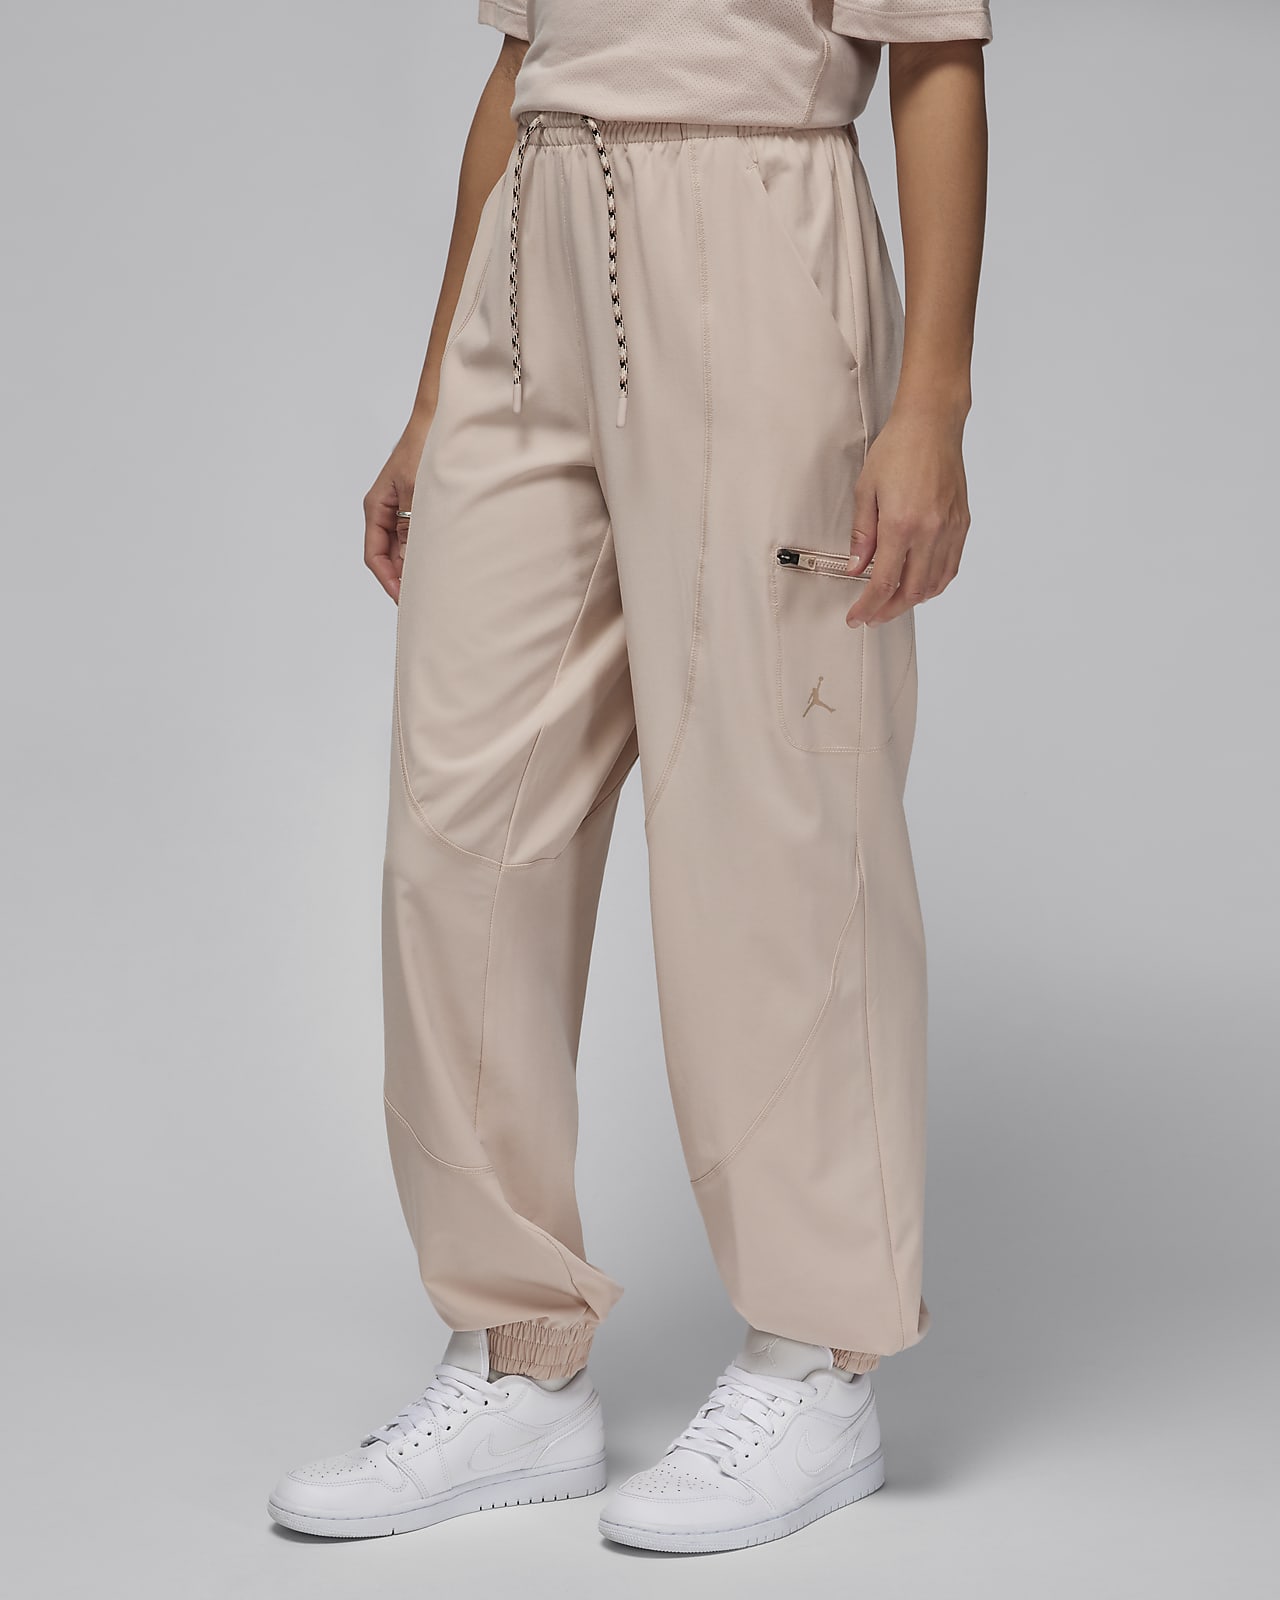 Pink Joggers, Work Pants for Women